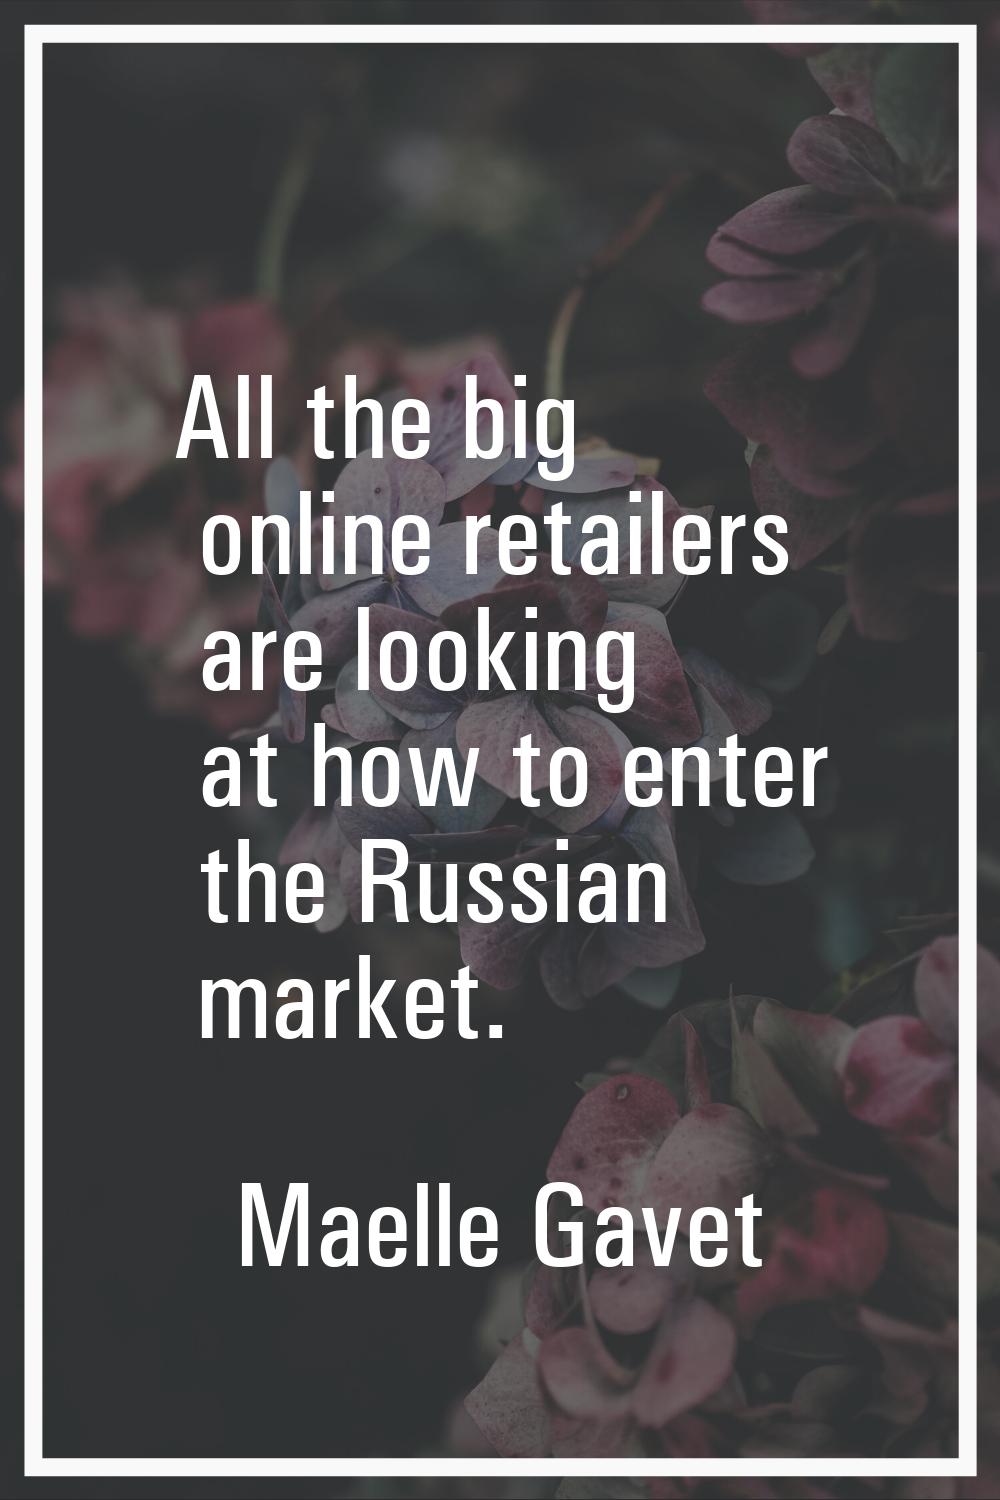 All the big online retailers are looking at how to enter the Russian market.